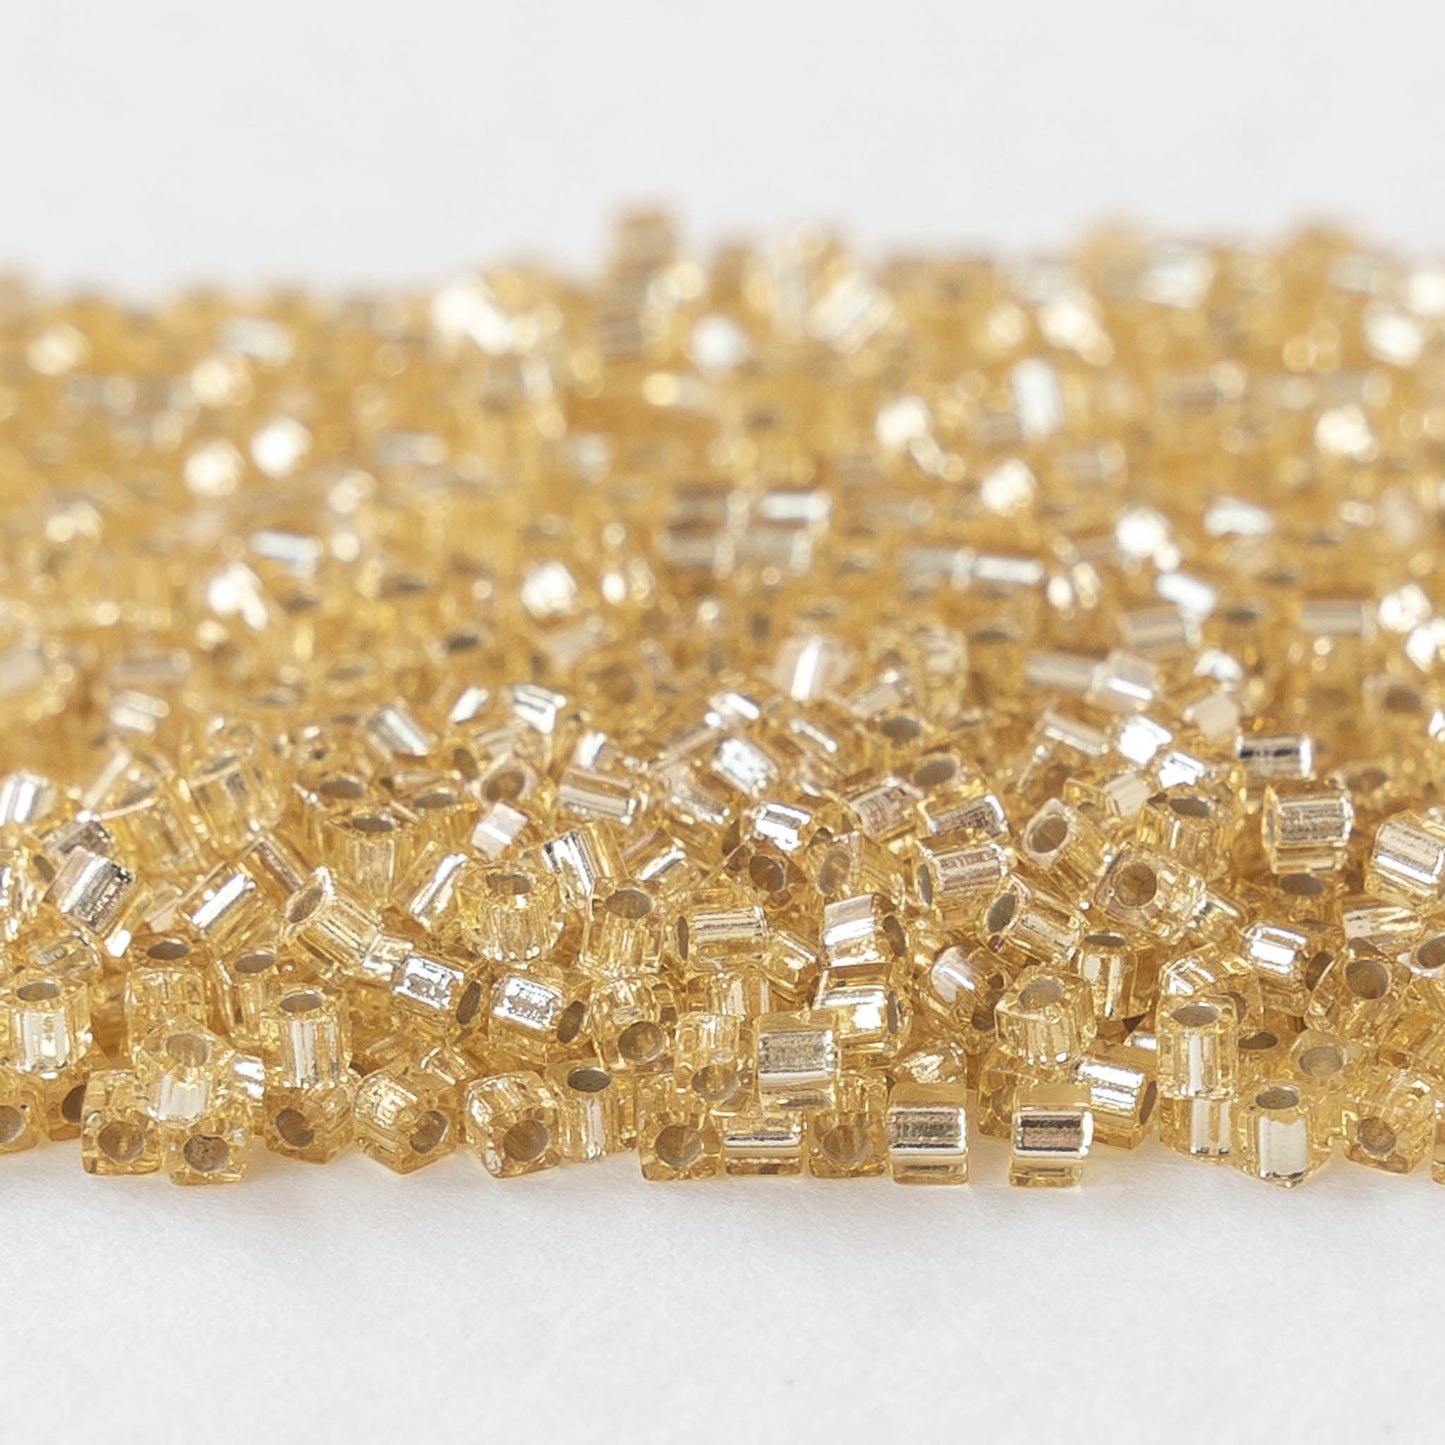 1.8mm Miyuki Cube Beads  - Silver Lined Gold - 20 grams